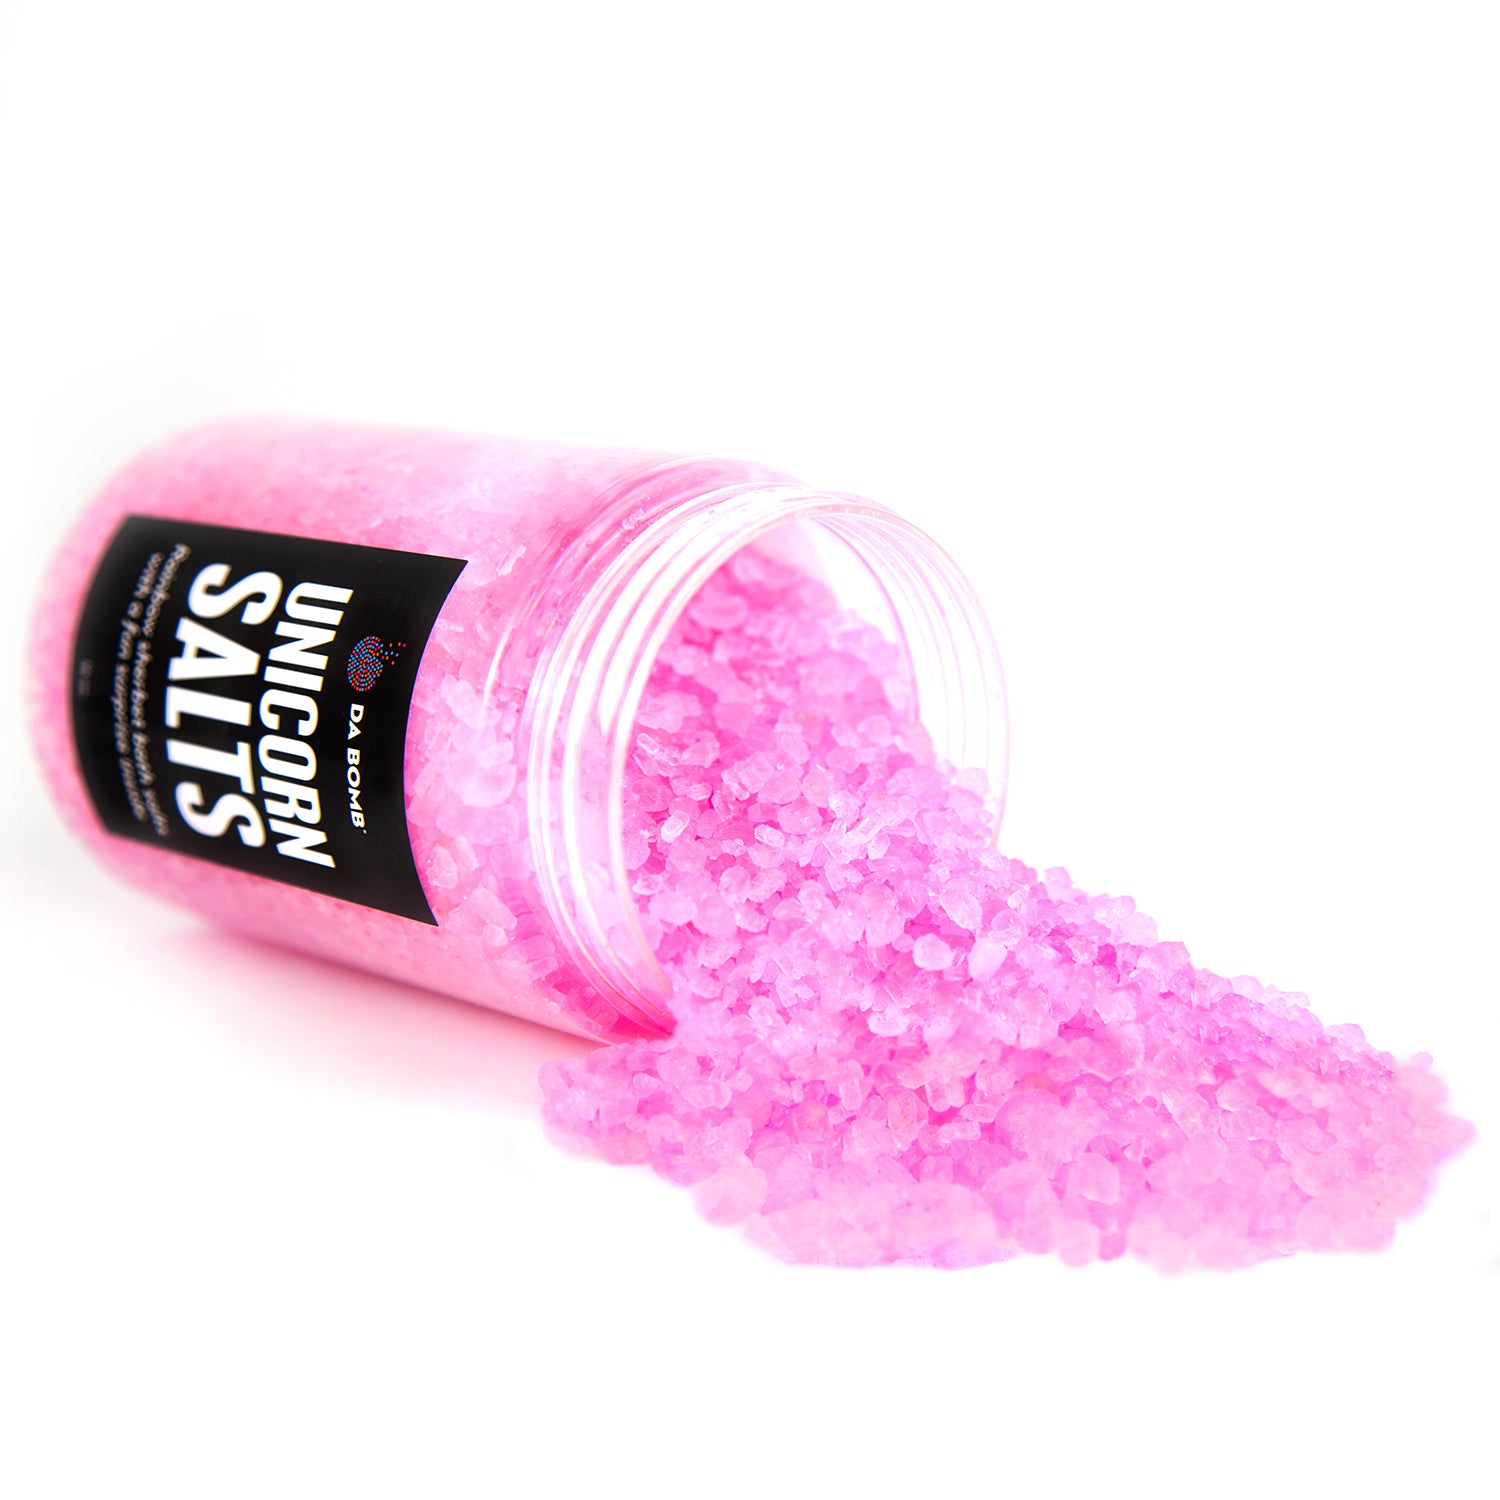 Clear jar with pink bath salts spilling out of it onto a white background.